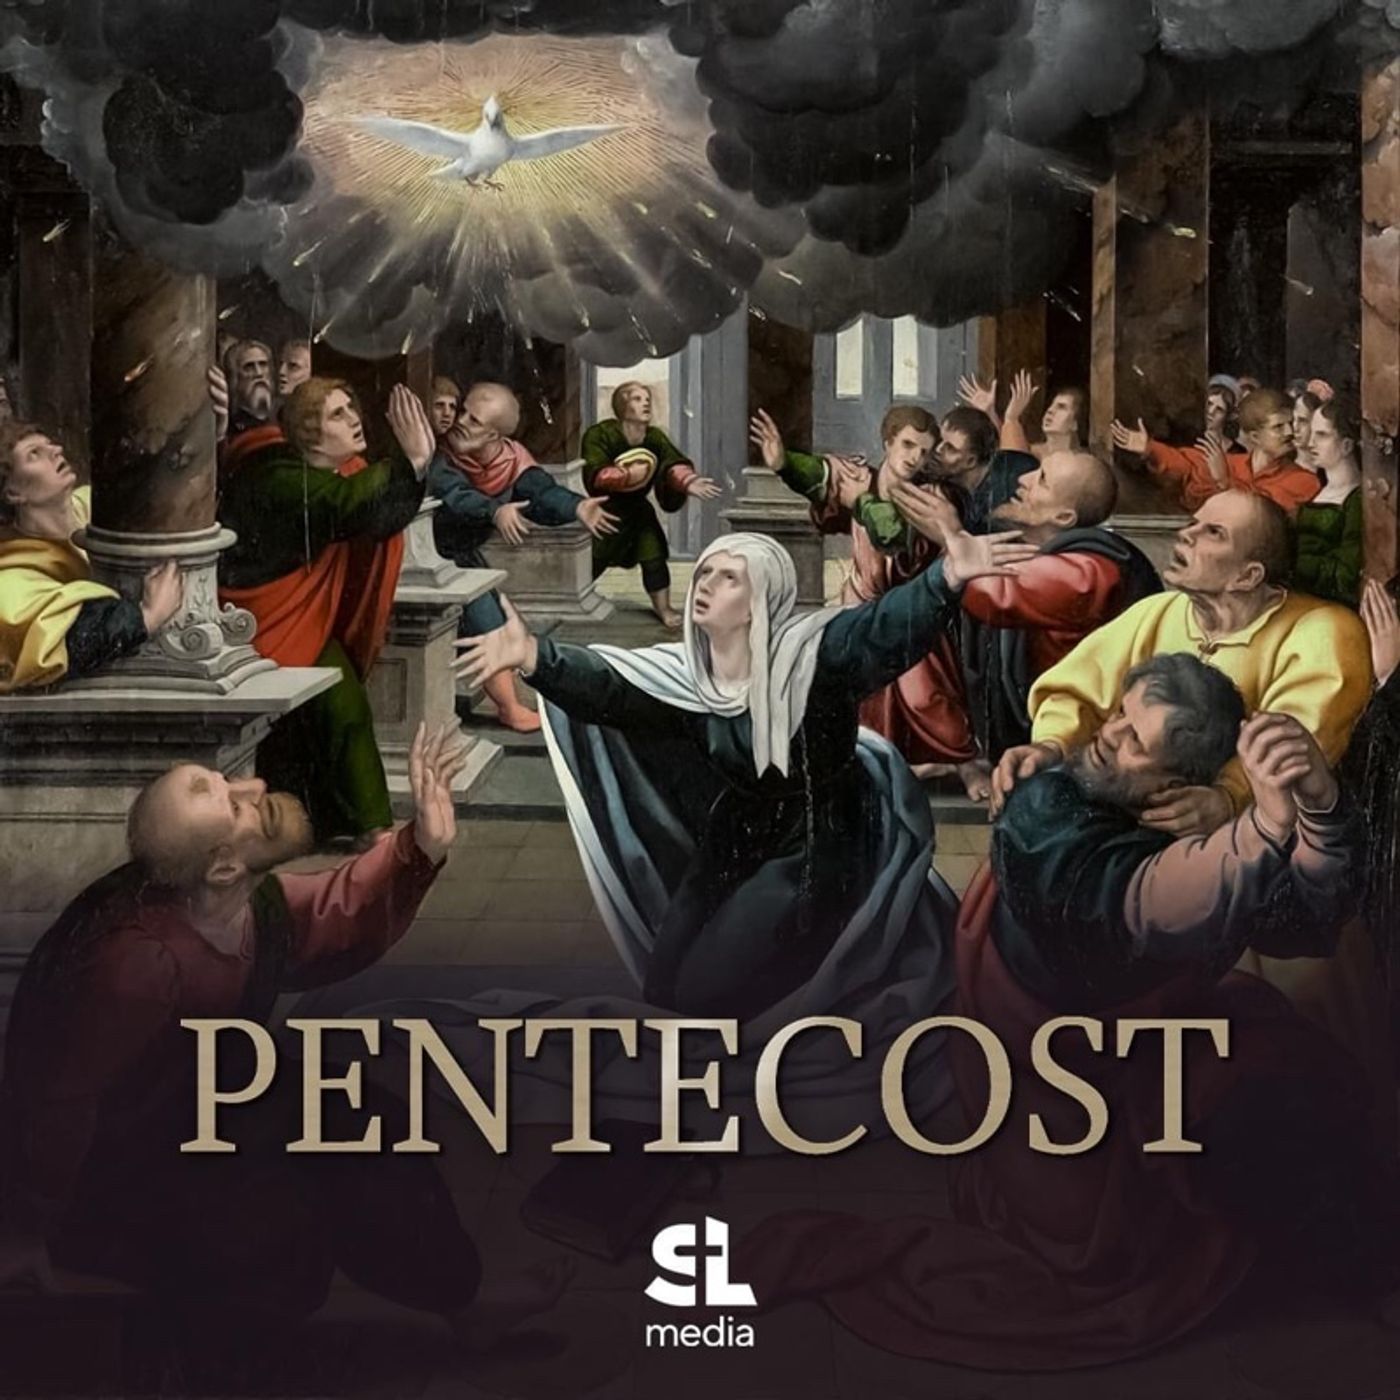 The Grace Watcher Report - Sunday Night Praises - It's All About Pentecost - The Most Neglected Teaching of The Modern Church